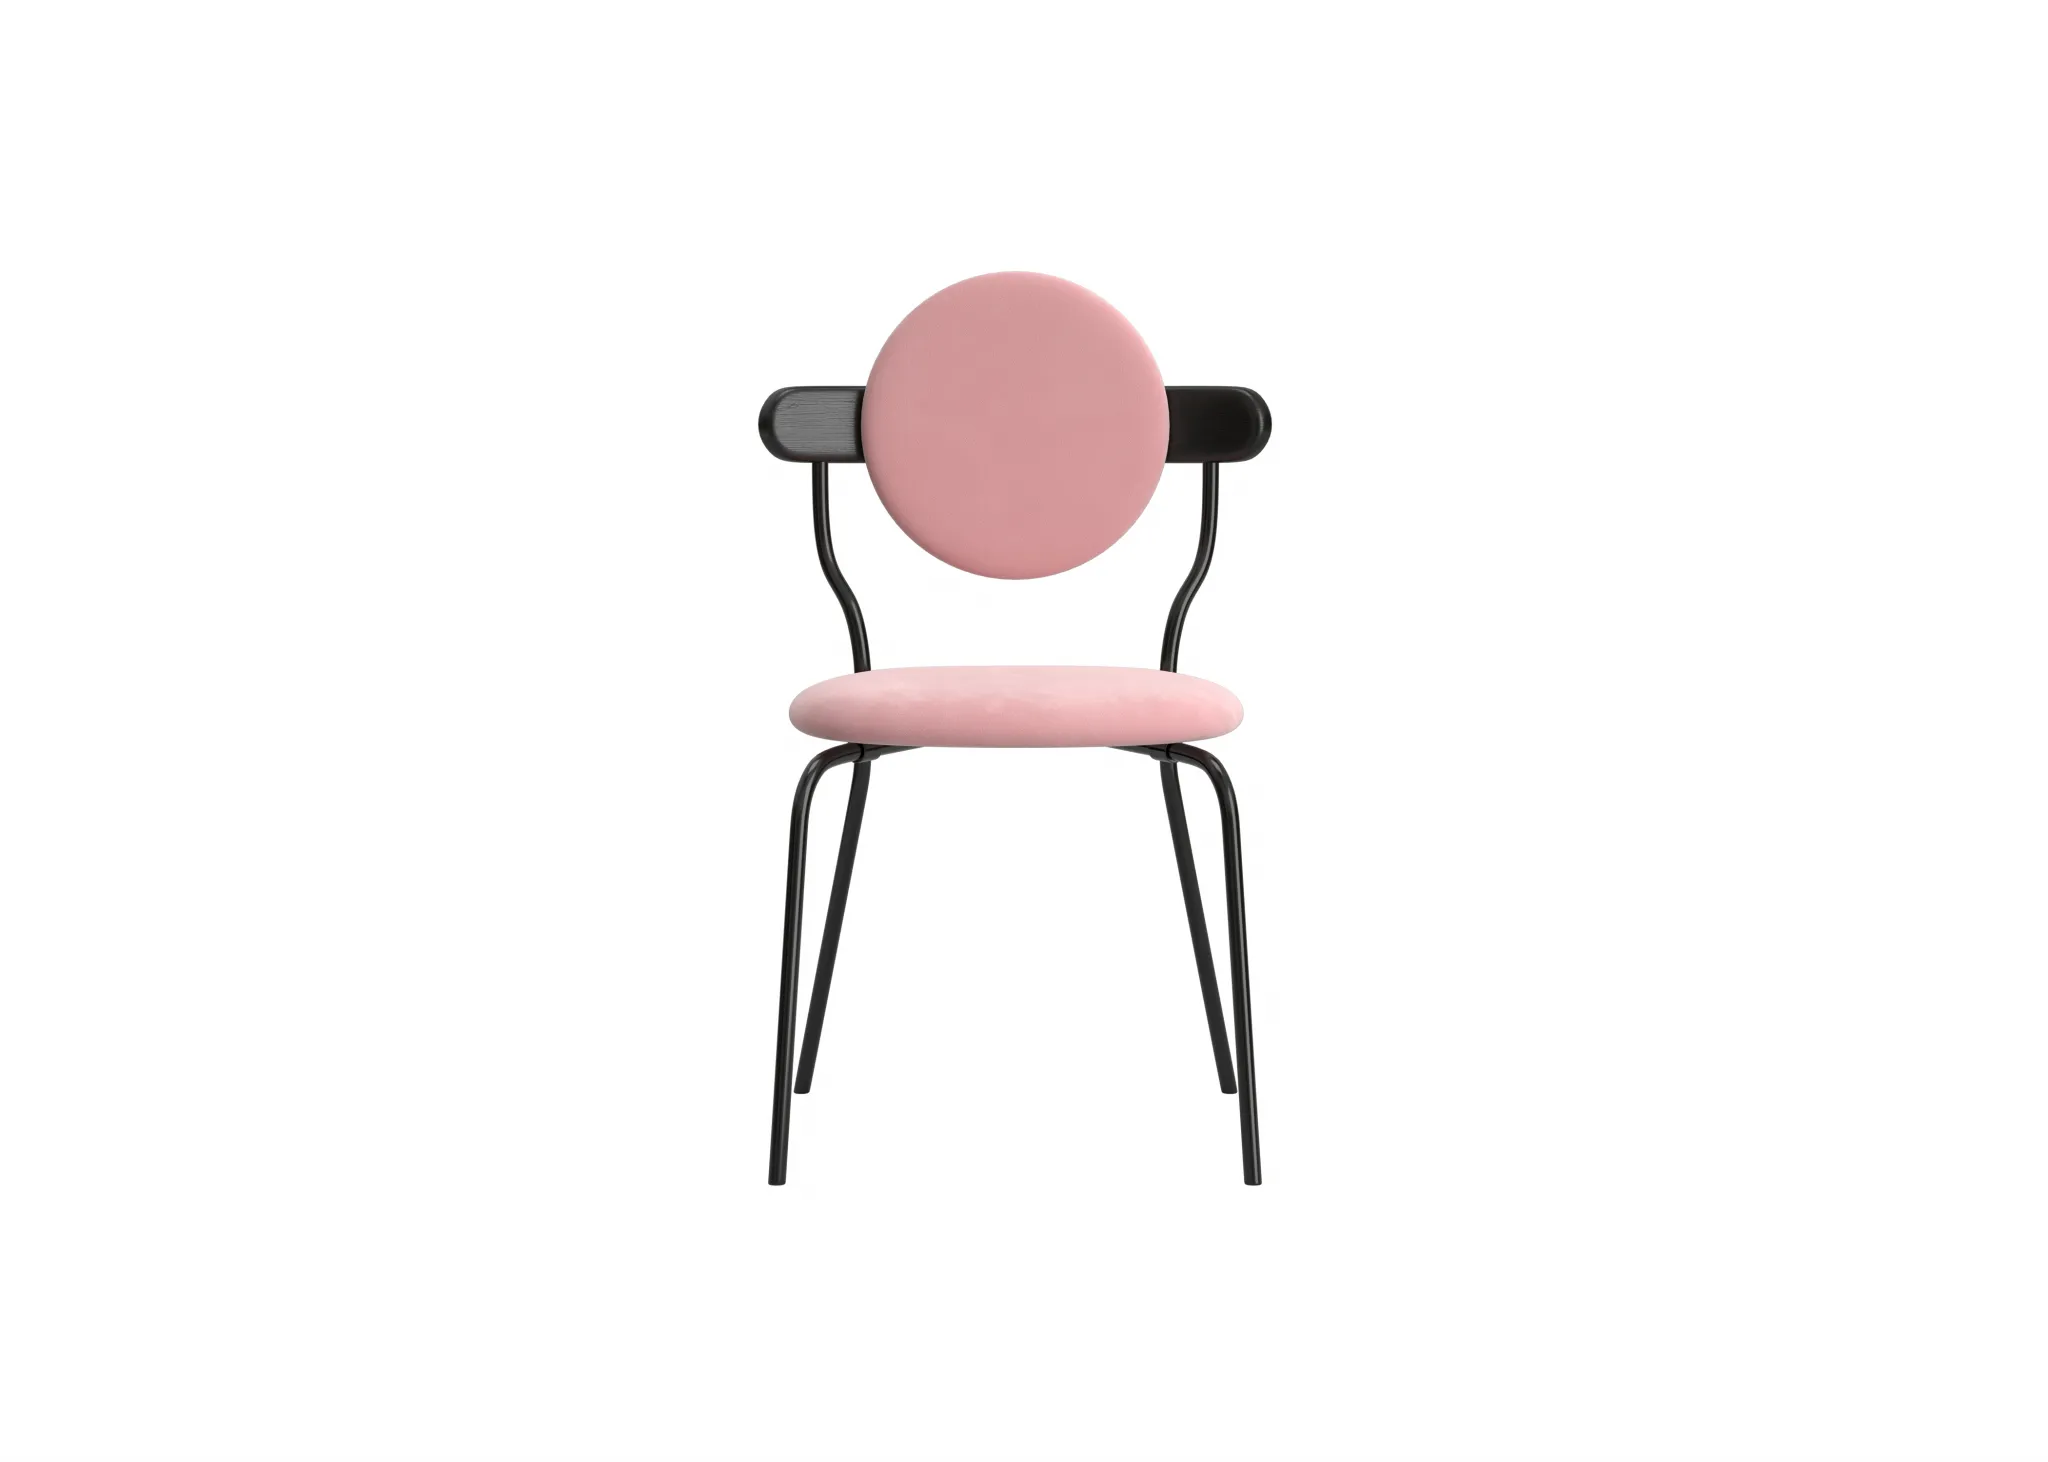 FURNITURE 3D MODELS – CHAIRS – 0309